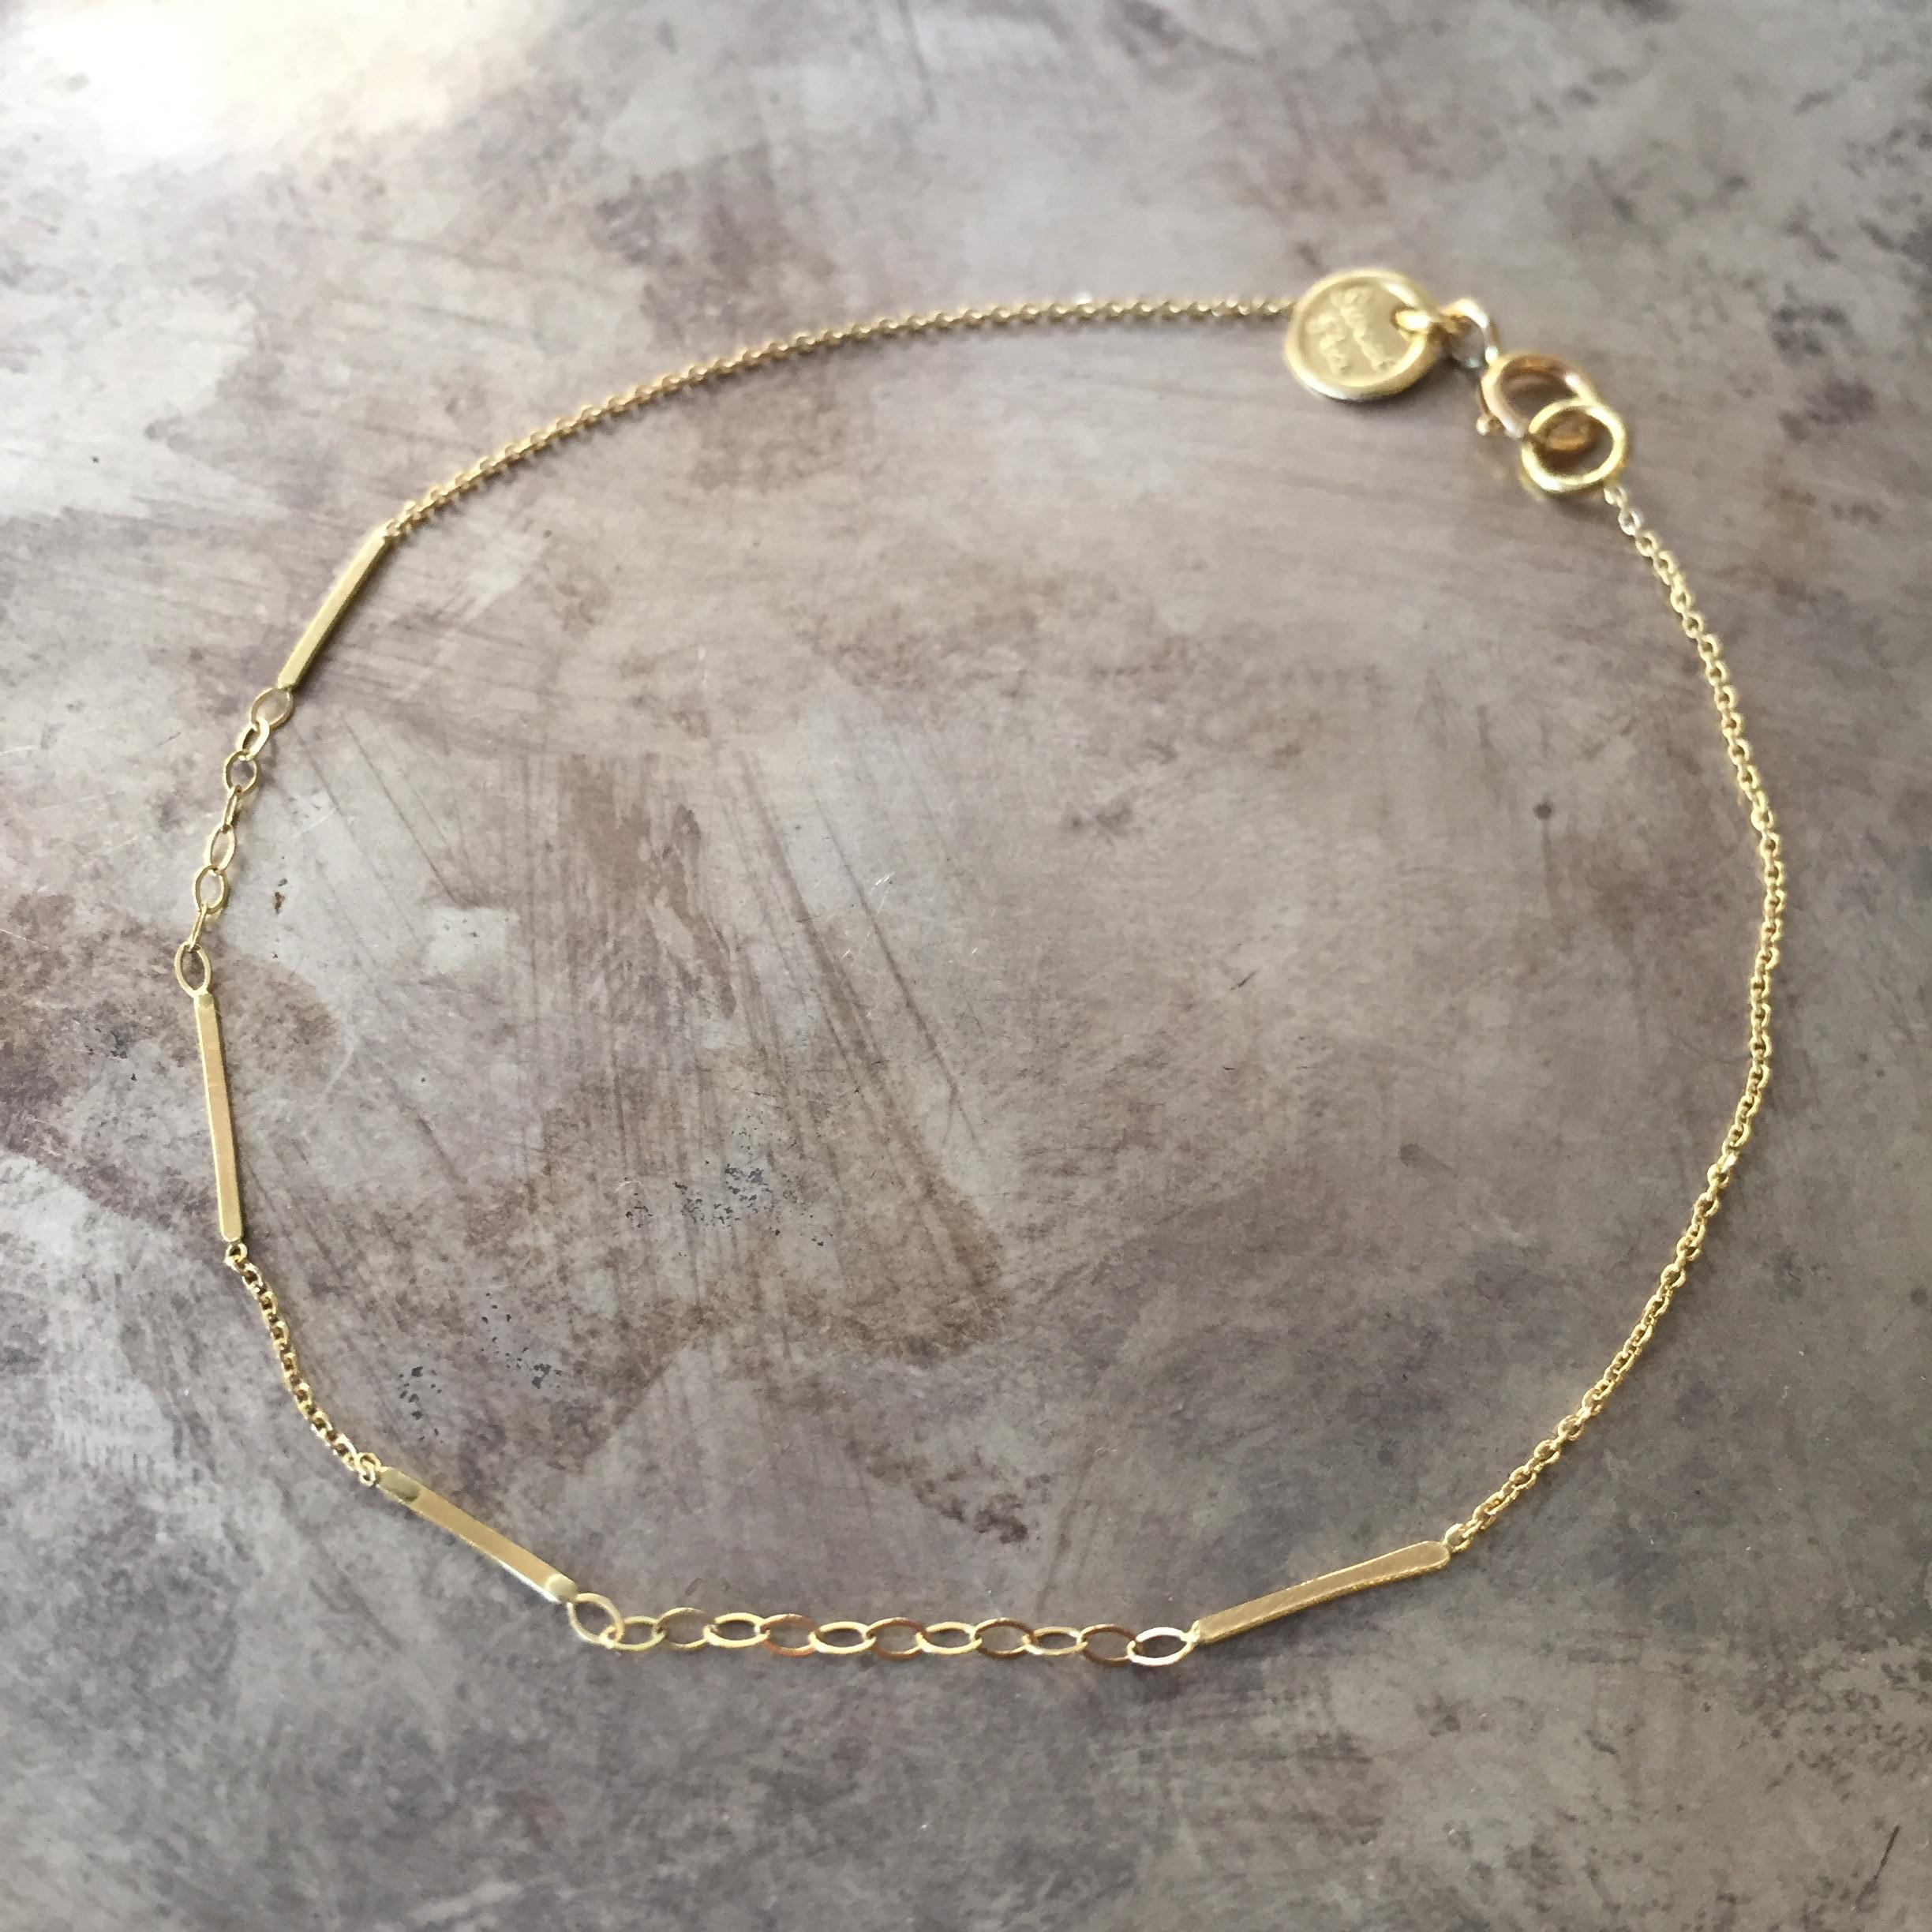 This bracelet is made from 18k yellow gold with sections of fine diamond cut chain and oval link chain with scattered organic bar details. This bracelet is 17.5cm long but can be made to order in any required length; please contact us for further